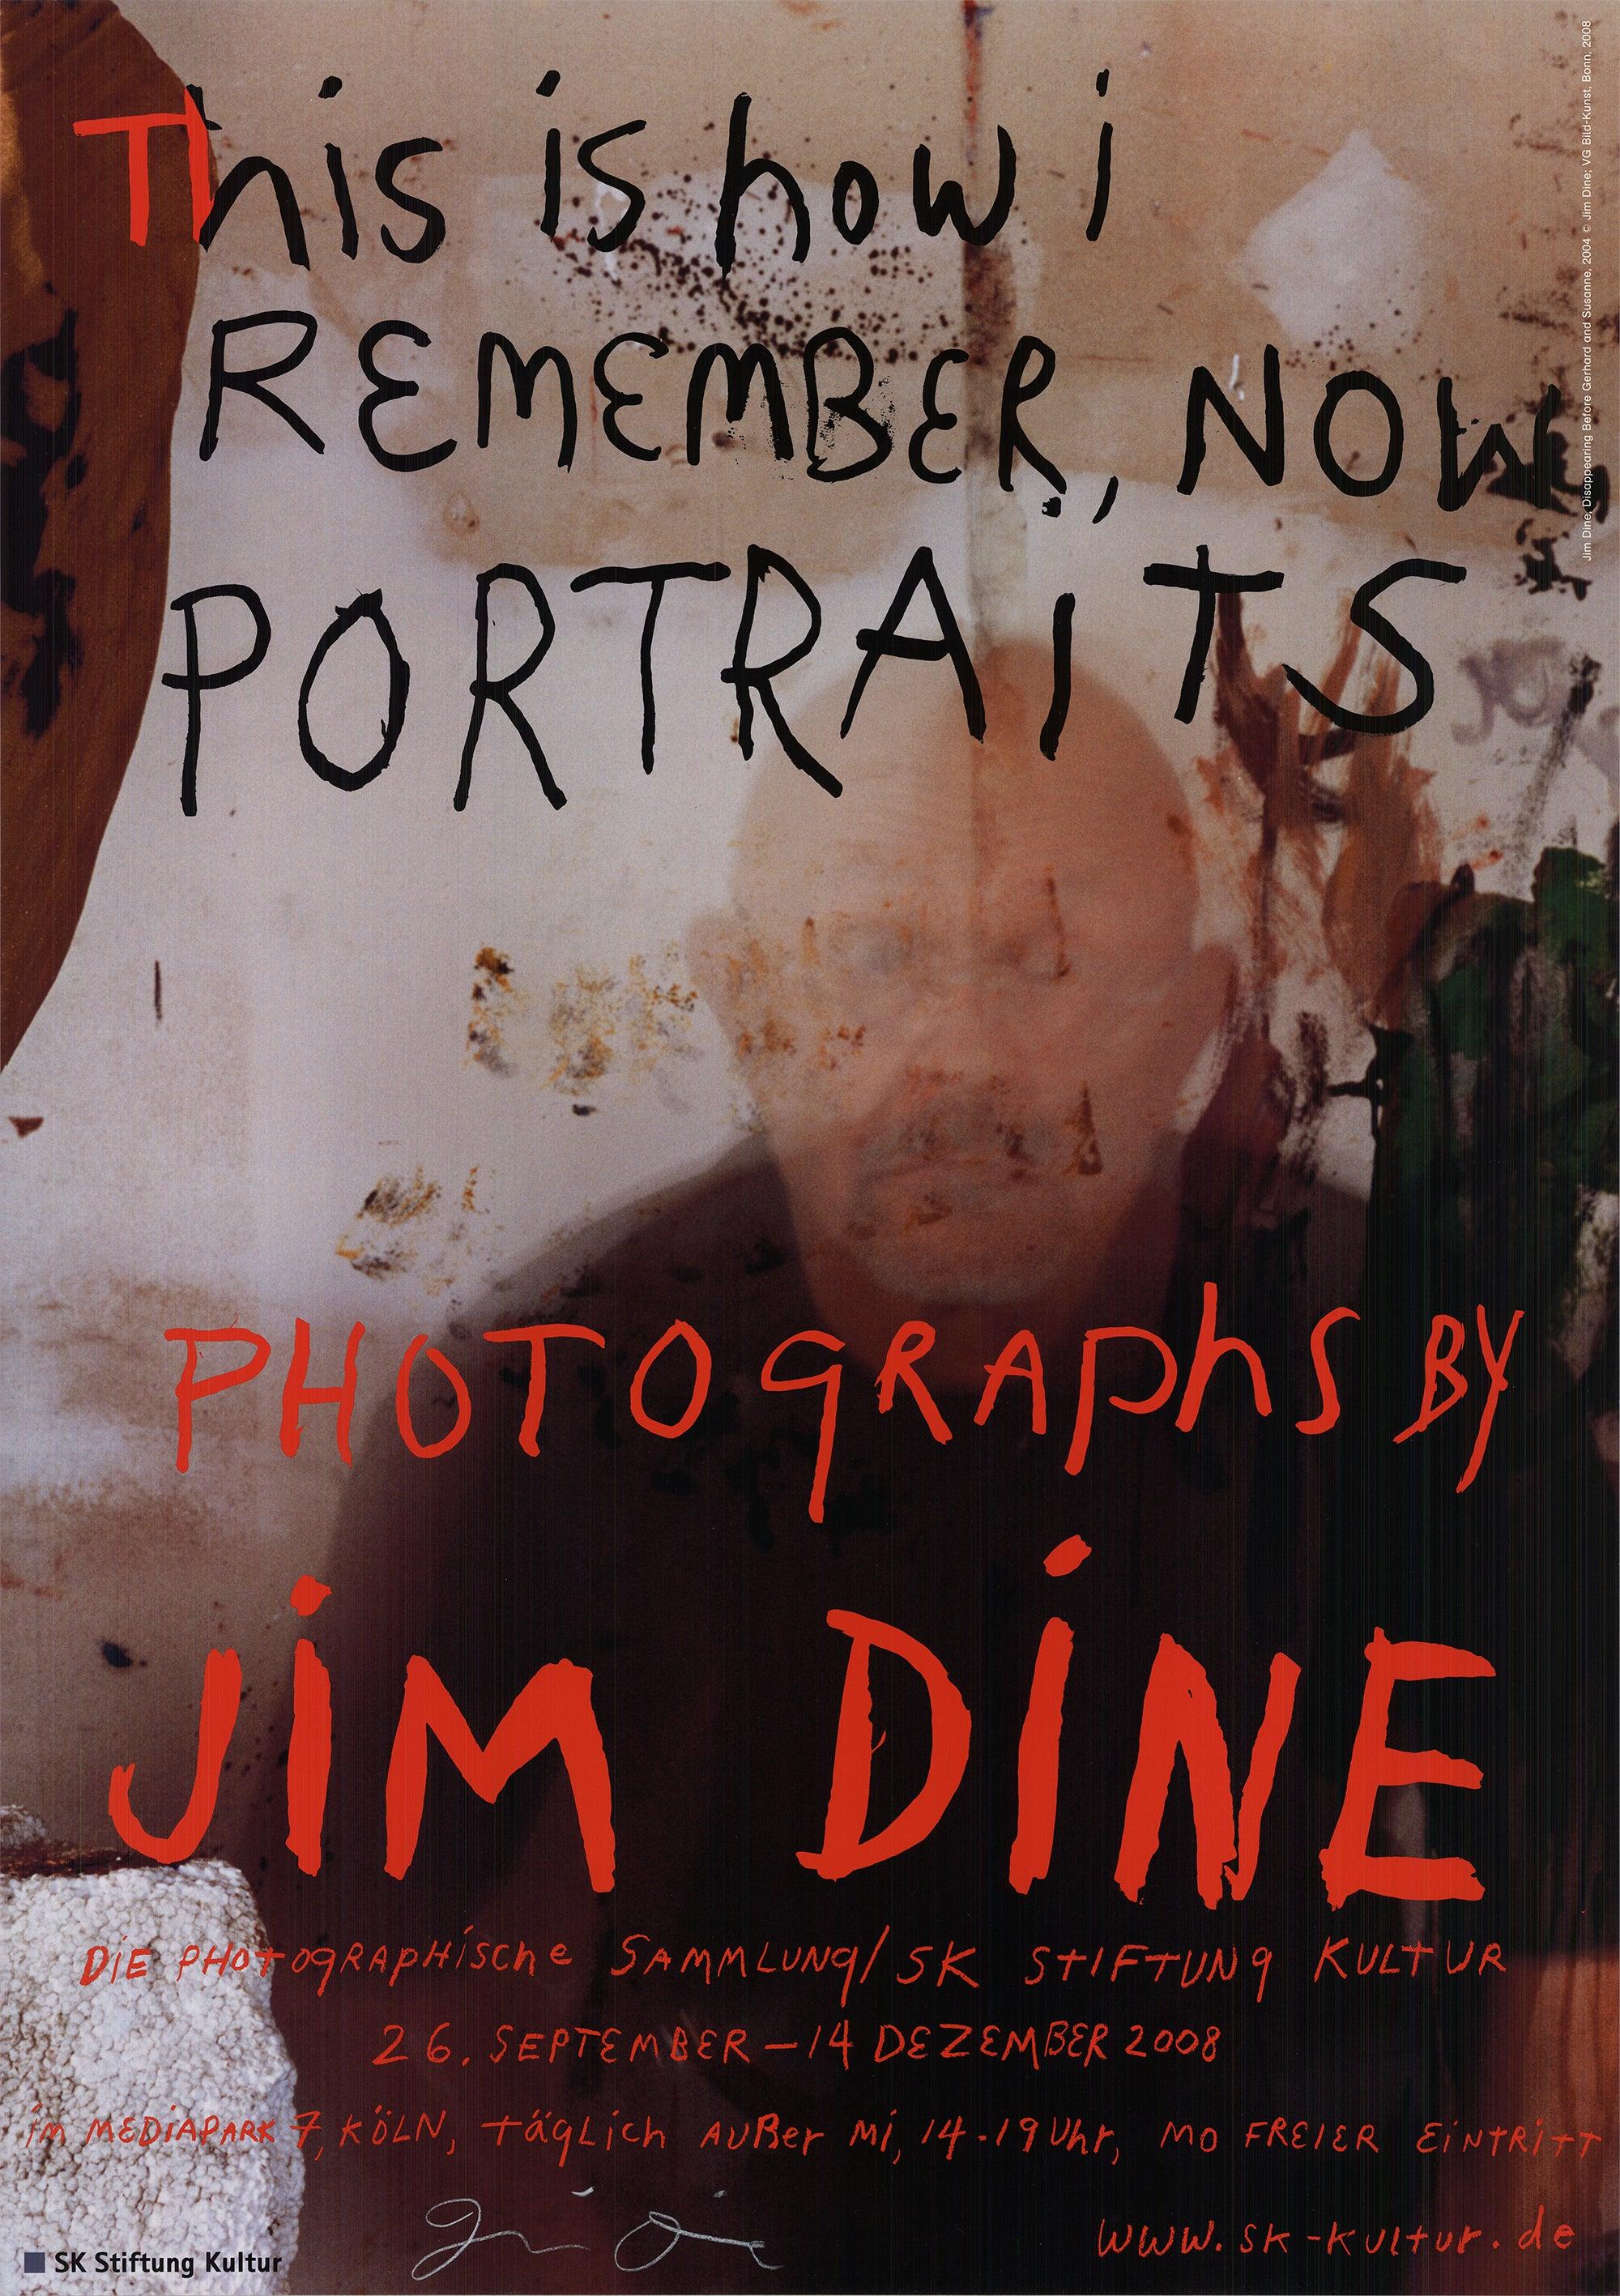 Paper Size: 33 x 23.5 inches ( 83.82 x 59.69 cm )
Image Size: 33 x 23.5 inches ( 83.82 x 59.69 cm )

Exhibition Poster for Jim Dine Photographs (2008)

This is an original exhibition poster produced for a German exhibition featuring Jim Dine's